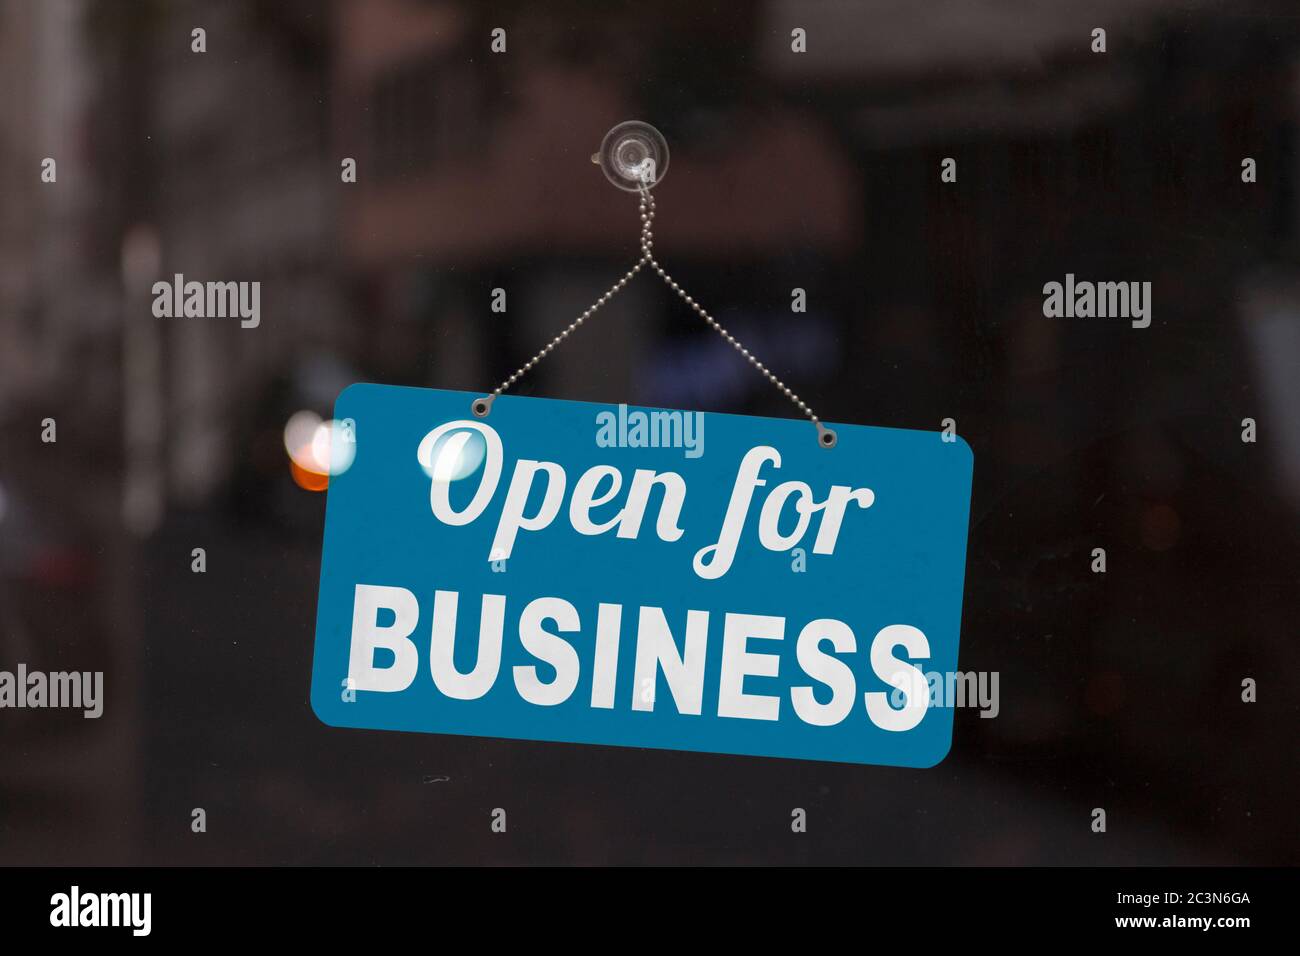 Close-up on a blue open sign in the window of a shop displaying the message: Open for business. Stock Photo